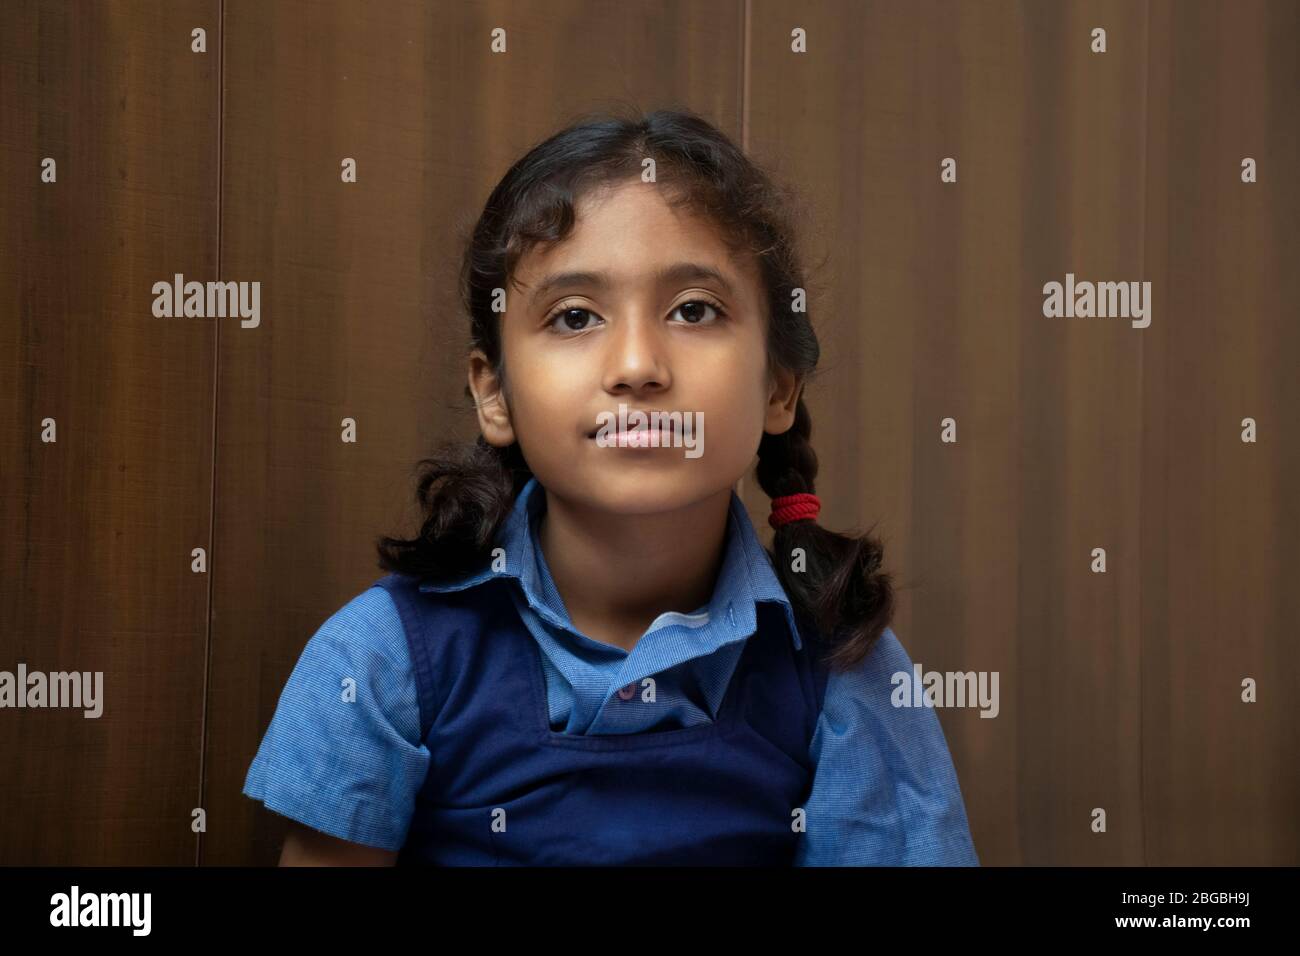 Indian school girl looking at camera Stock Photo